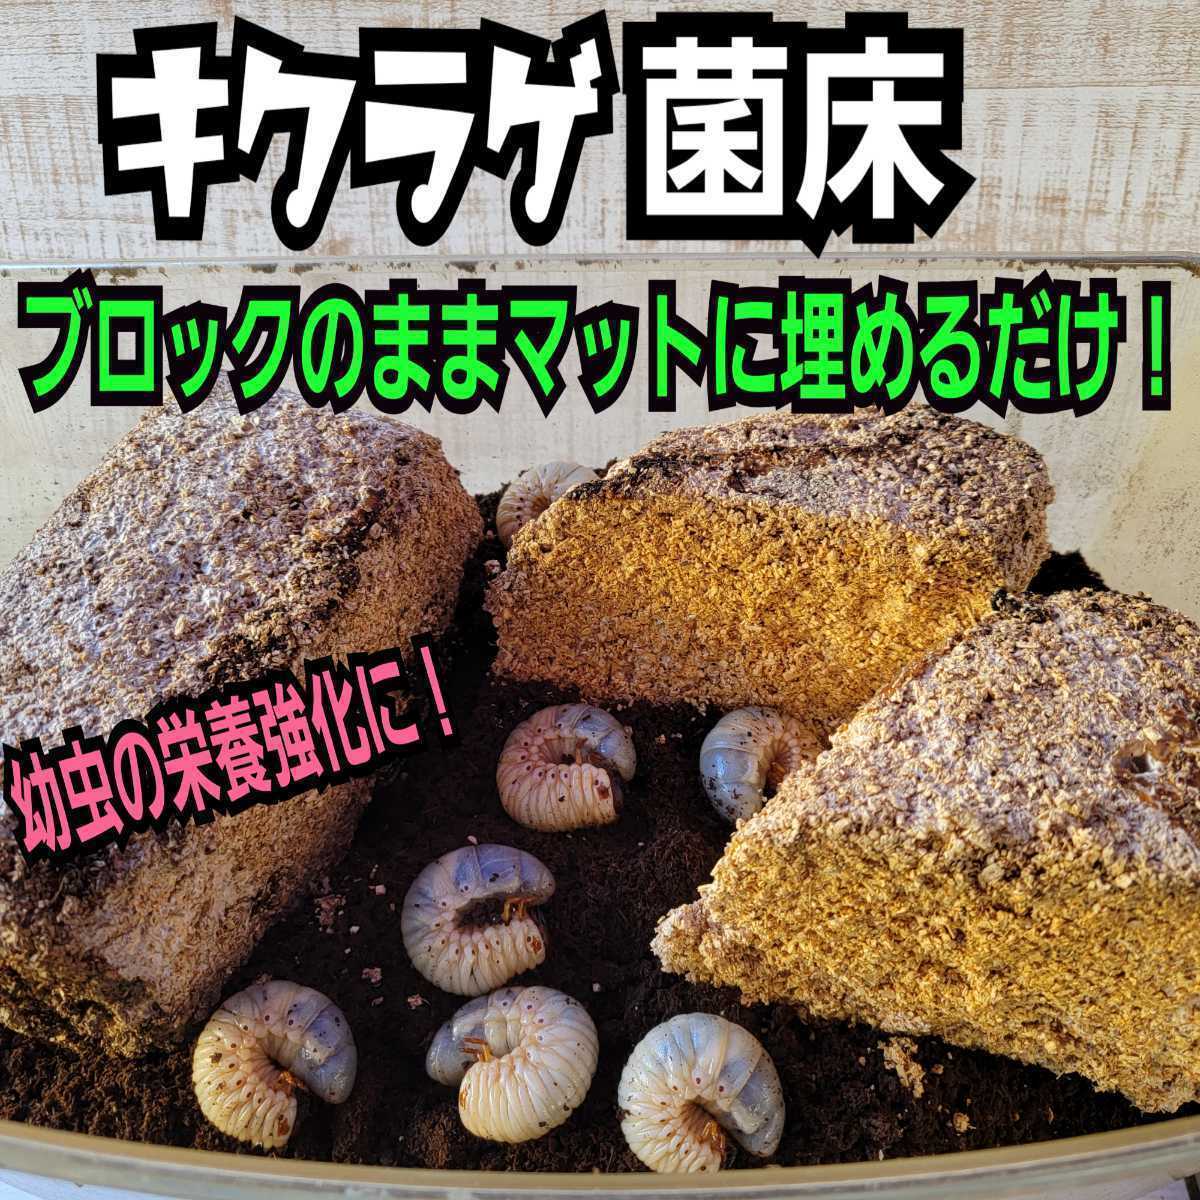  rhinoceros beetle larva. nutrition strengthen . eminent extra-large 3500cc*ki jellyfish . floor [2 piece ] block. .. mat . embed only! stag beetle. production egg floor also possible to use!